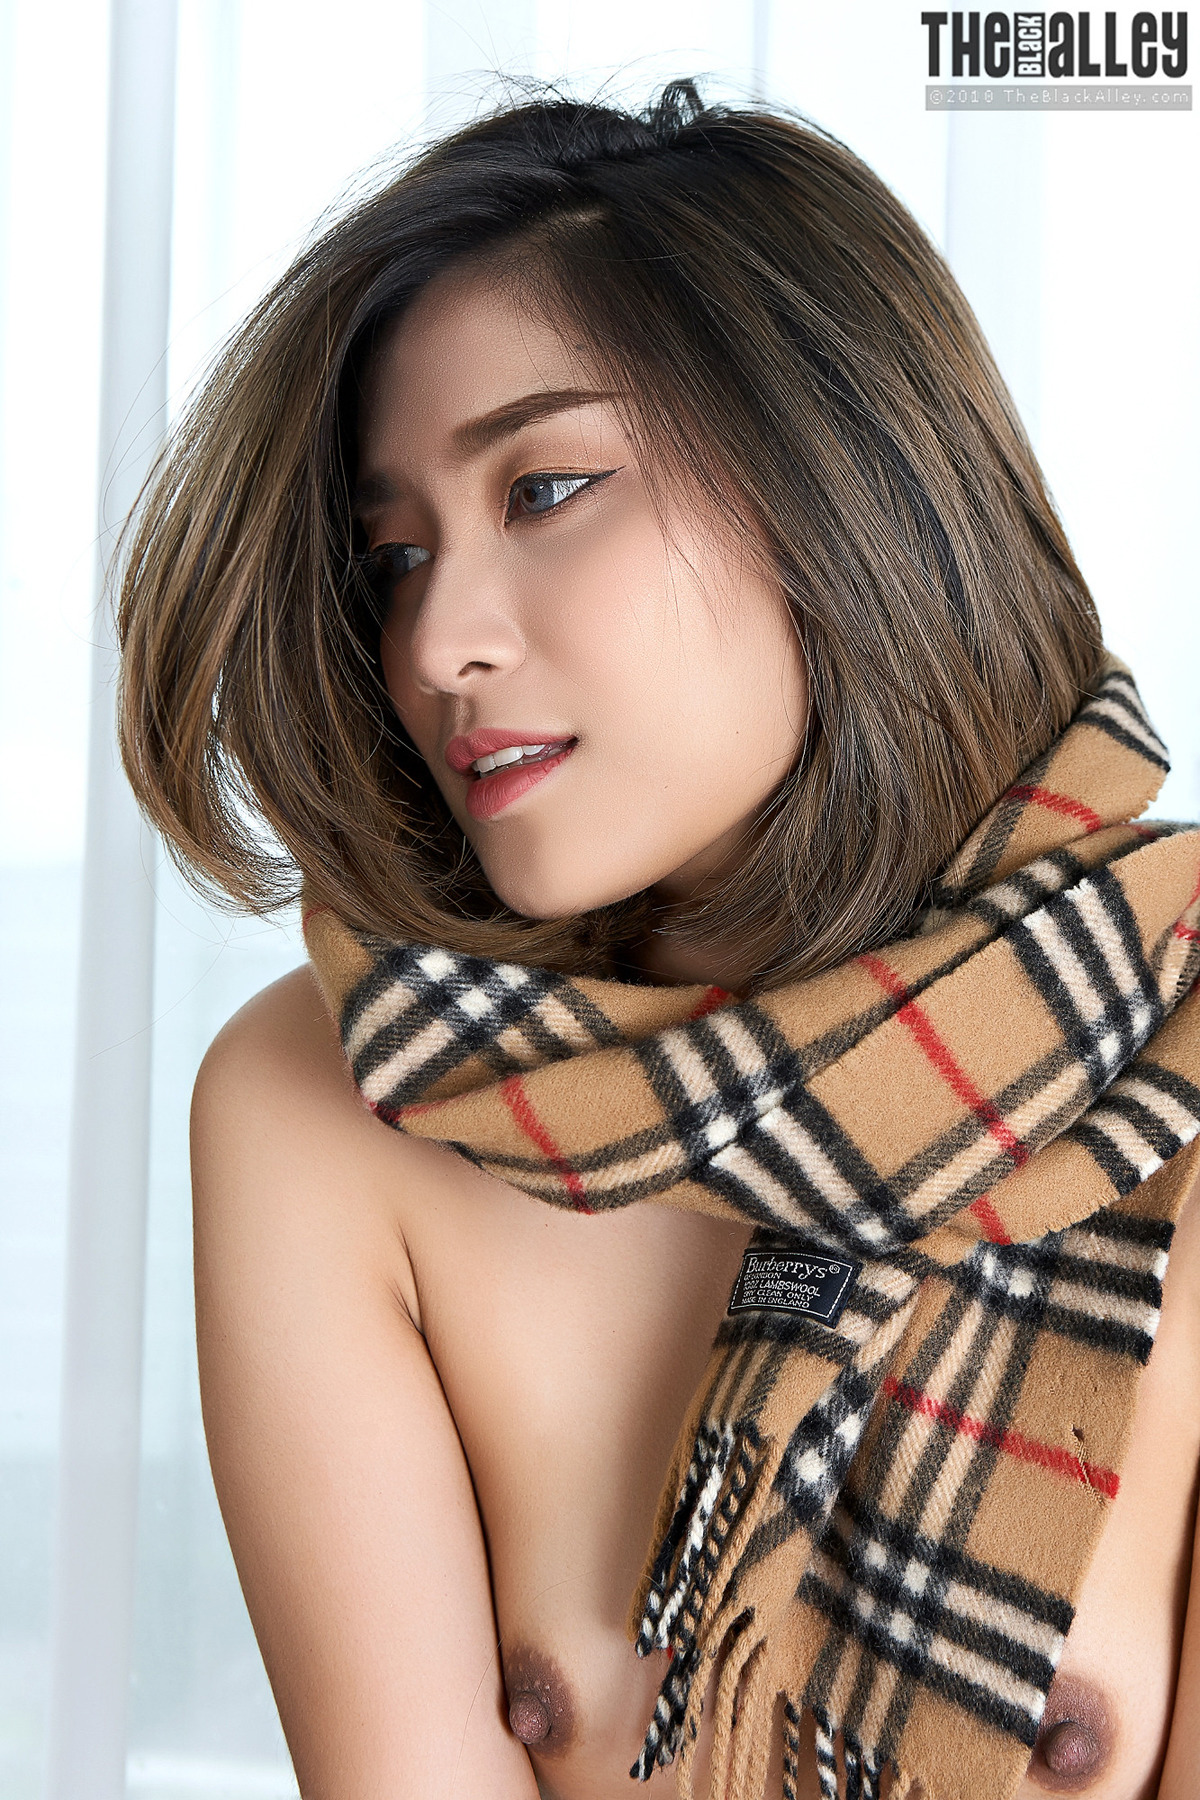 Gorgeous Asian Apple - The New Scarf - picture 11